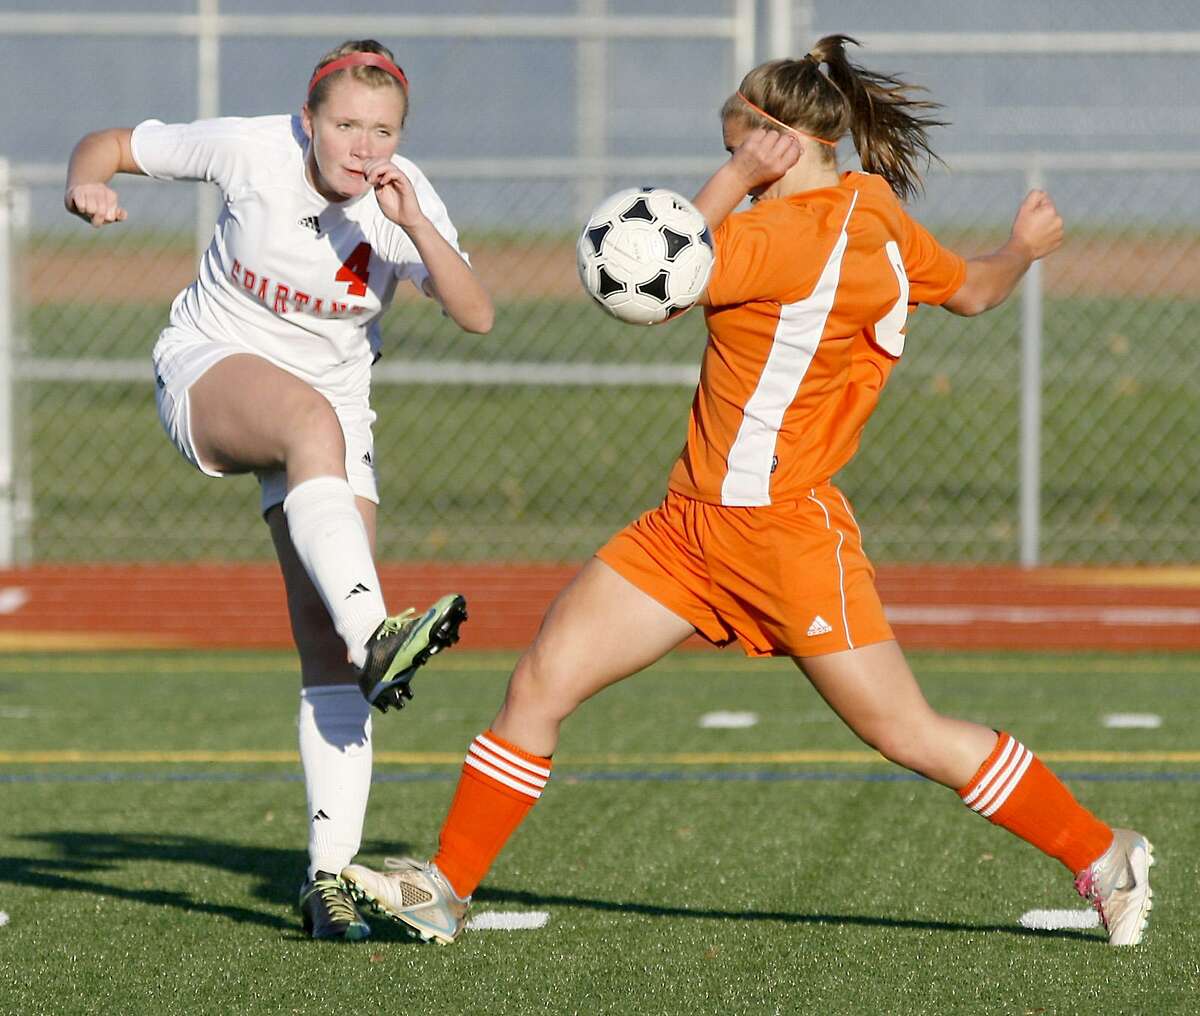 Dispatch Staff Photo by JOHN HAEGER twitter.com/oneidaphoto New Hartford's Lexie Raynard (4) crosses the ball into the center of the field as Oneida's Emily LaSalle (6) defends in the first half of the Sec III prelim in New Hartford on Tuesday, Oct. 25, 2011.